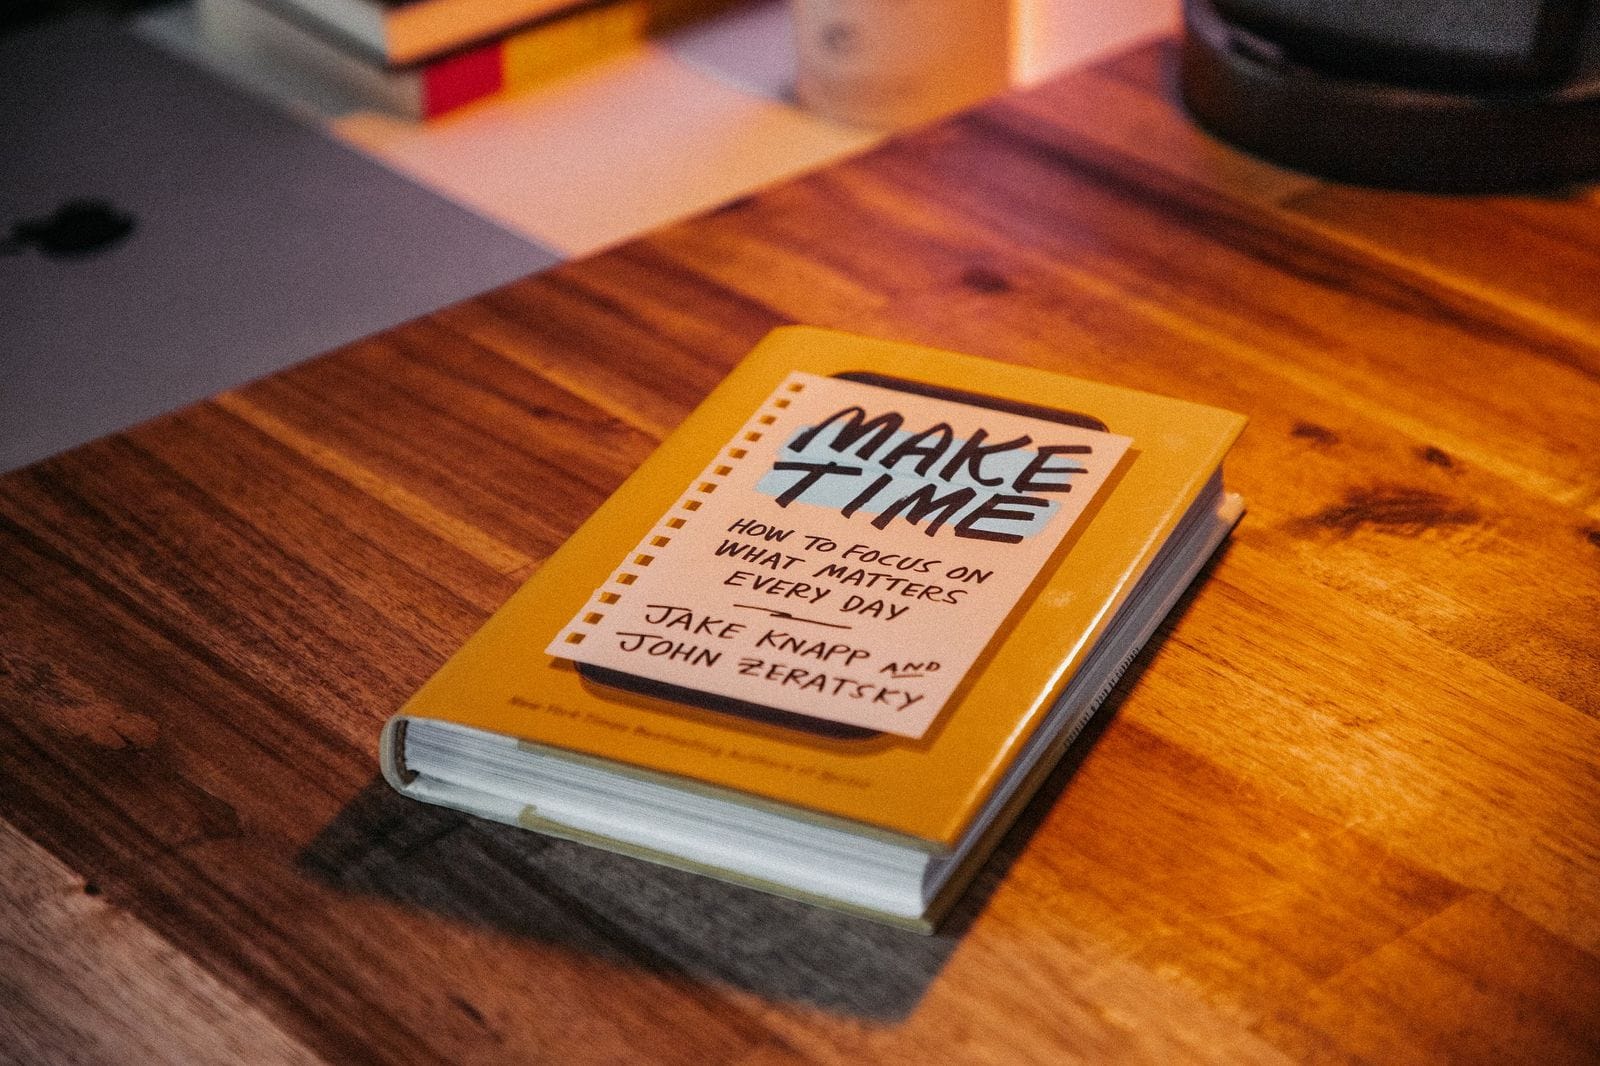 A book called Make Time: How to Focus on What Matters Every Day lying on a wooden desk